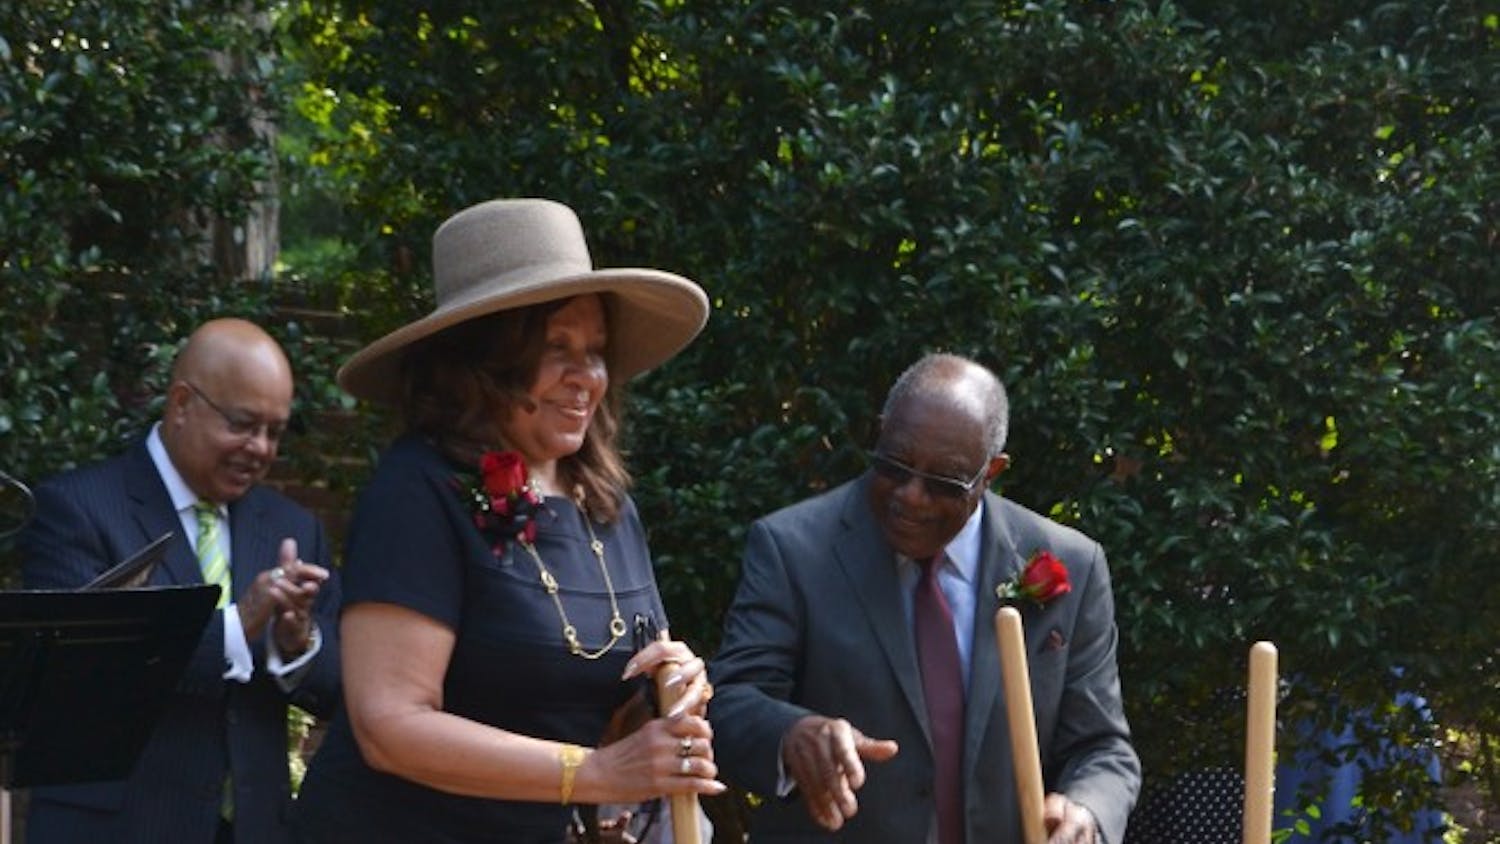 	Henrie Monteith Treadwell and James Solomon Jr. turn over the dirt at the site of the future desegregation reflection garden, leaving a shovel stationary in remembrance of Robert Anderson, who, with Treadwell and Solomon, desegregated the university in 1963.